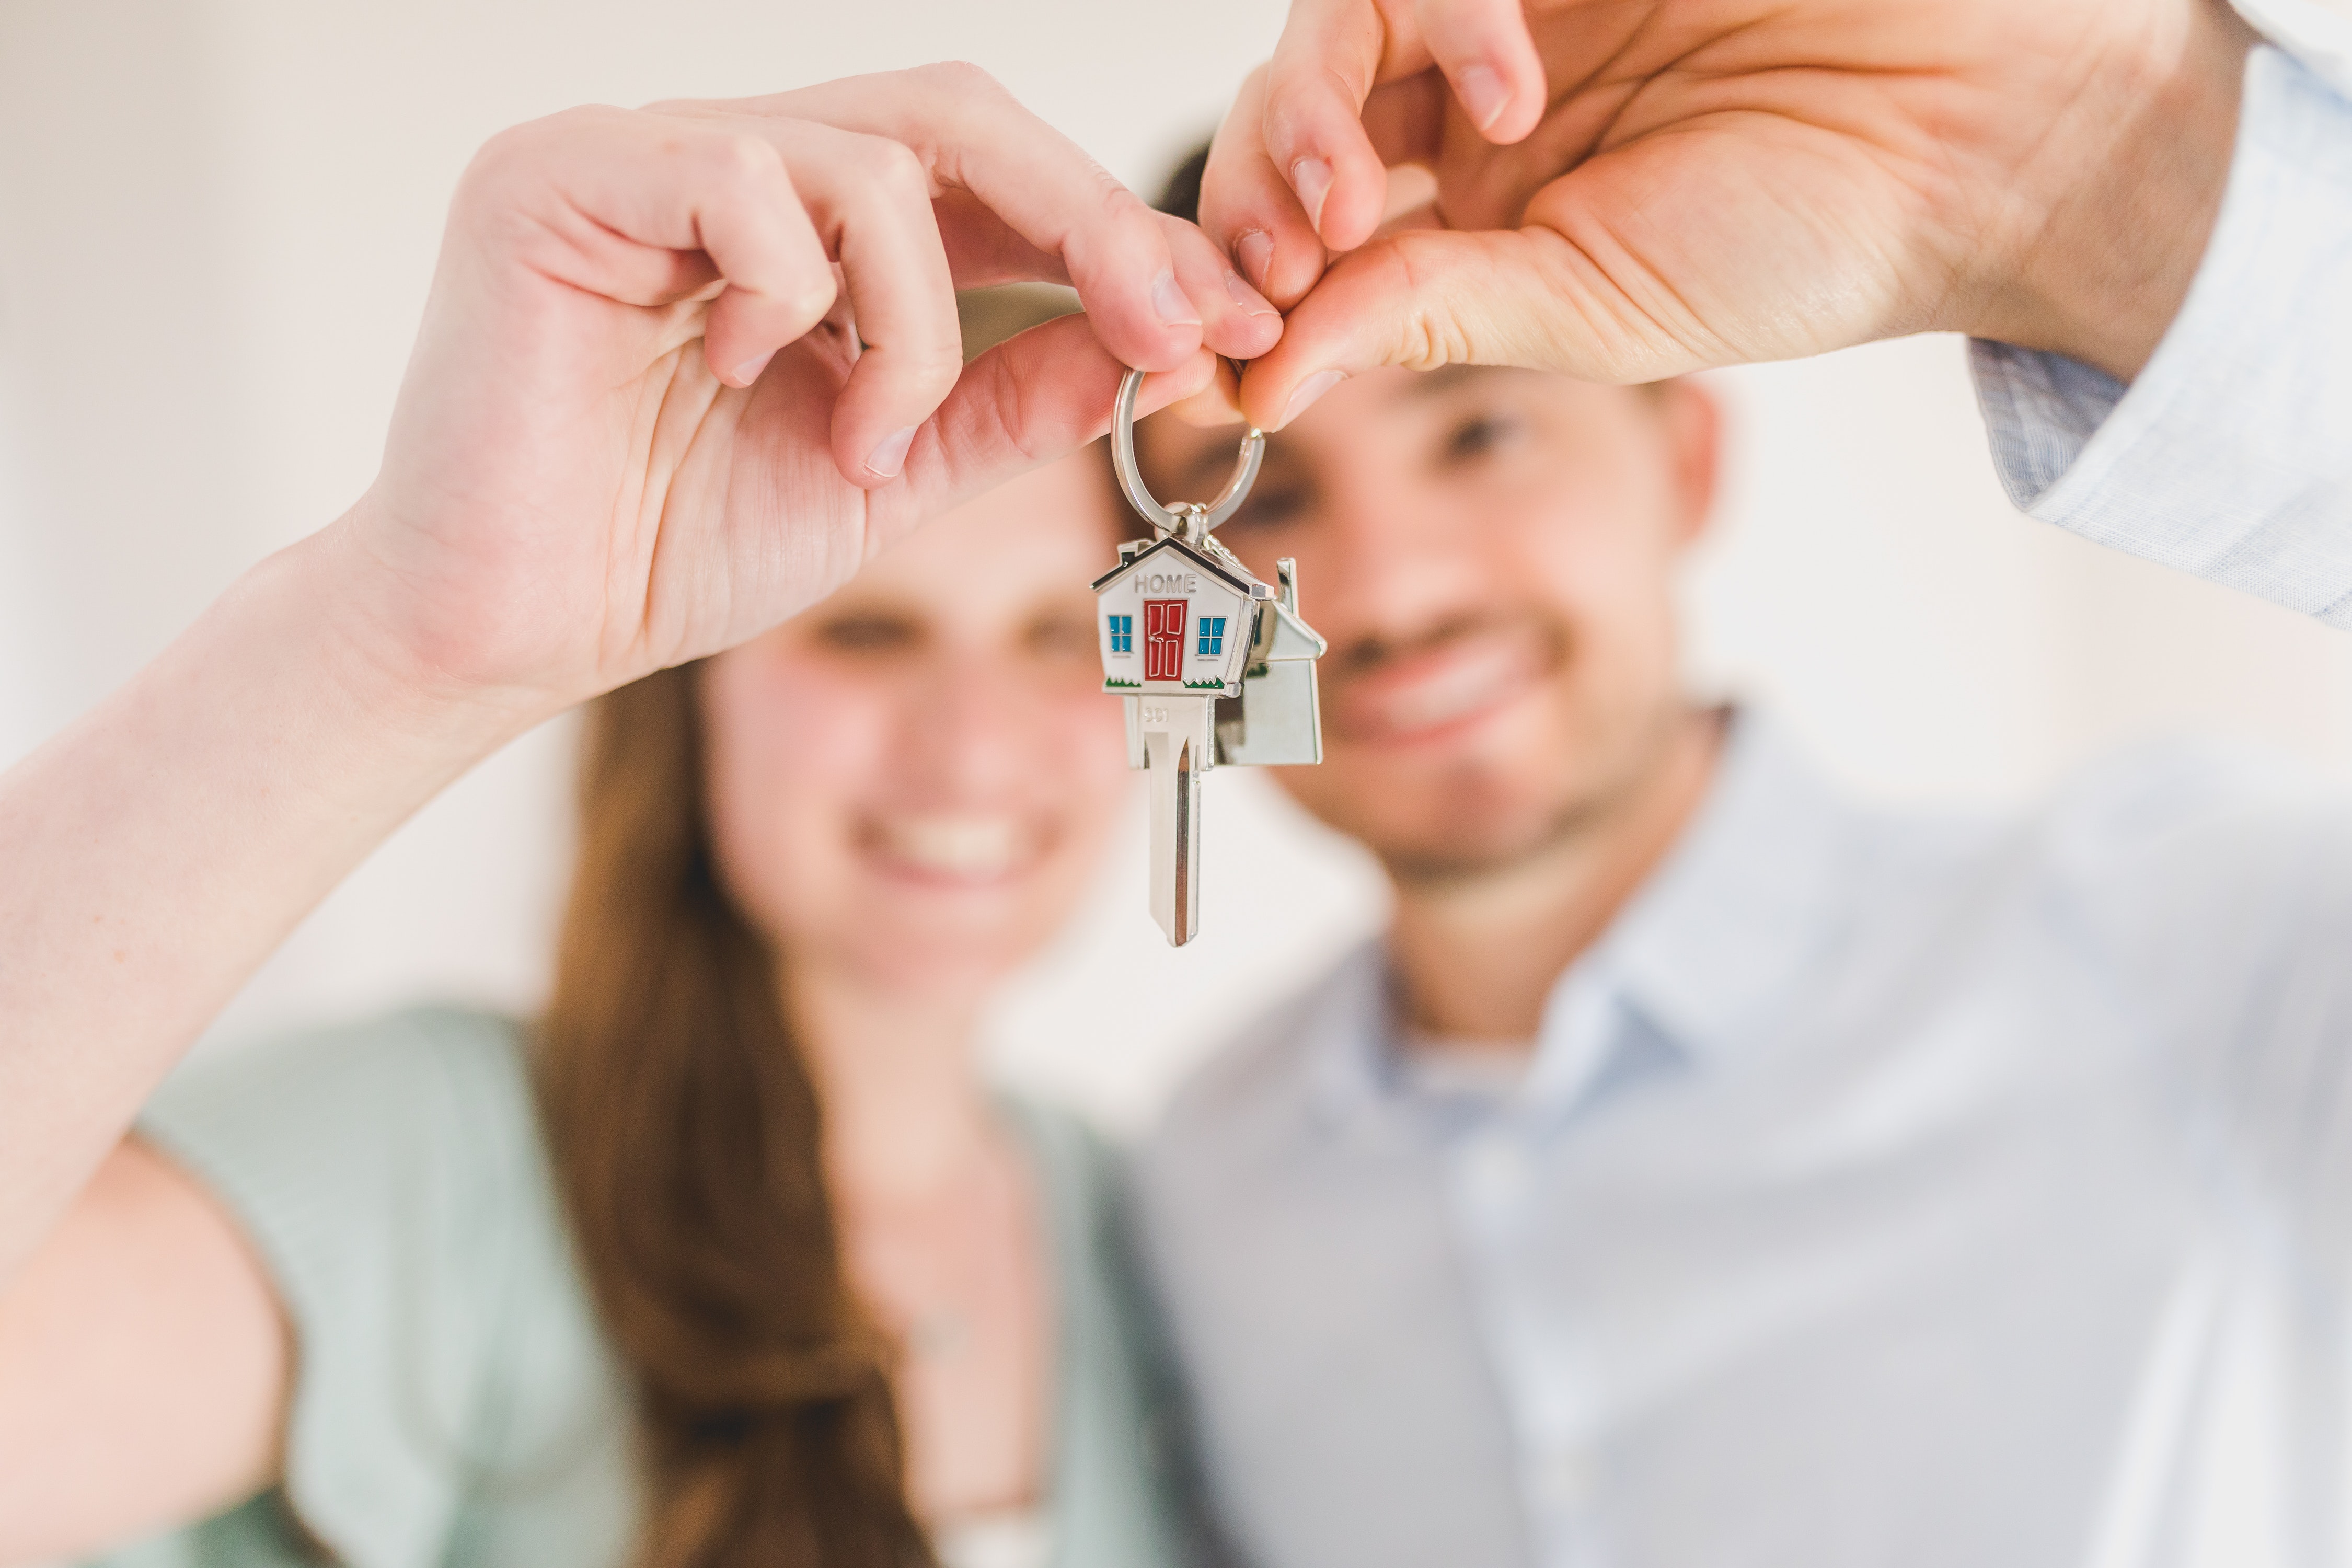 If you're looking to purchase a property, we can help you find the perfect one for your needs. We take care of everything from start to finish, so you can focus on making your new home your own. Contact us today and let us help you find your dream home!